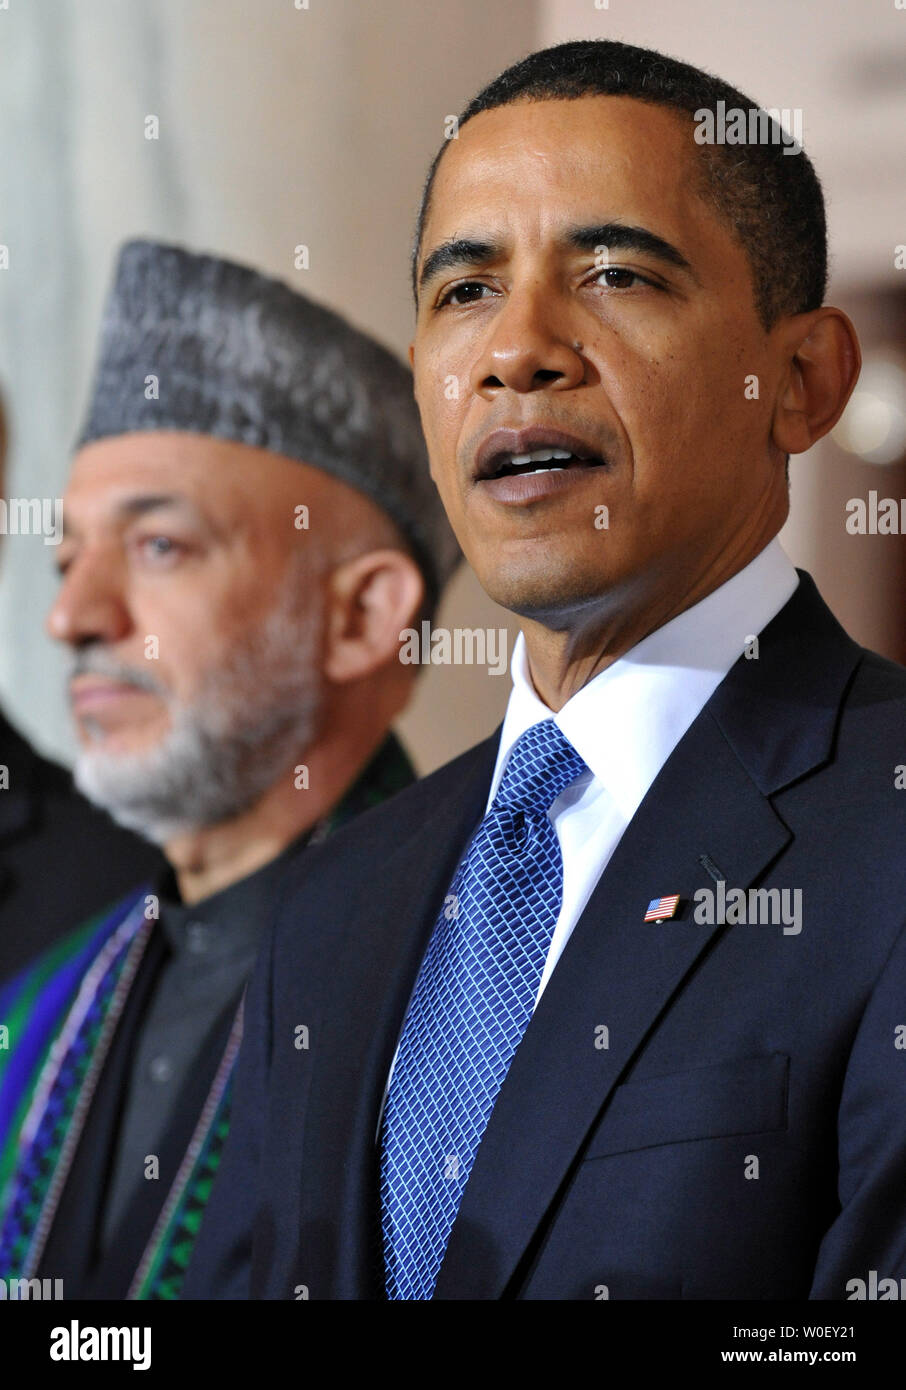 U.S. President Barack Obama (R) delivers remarks alongside Afghanistan President Hamid Karzai following a meeting with him and Pakistan President Asif Ali Zardari (not pictured), in the Grad Foyer at the White House in Washington on May 6, 2009. (UPI Photo/Kevin Dietsch) Stock Photo